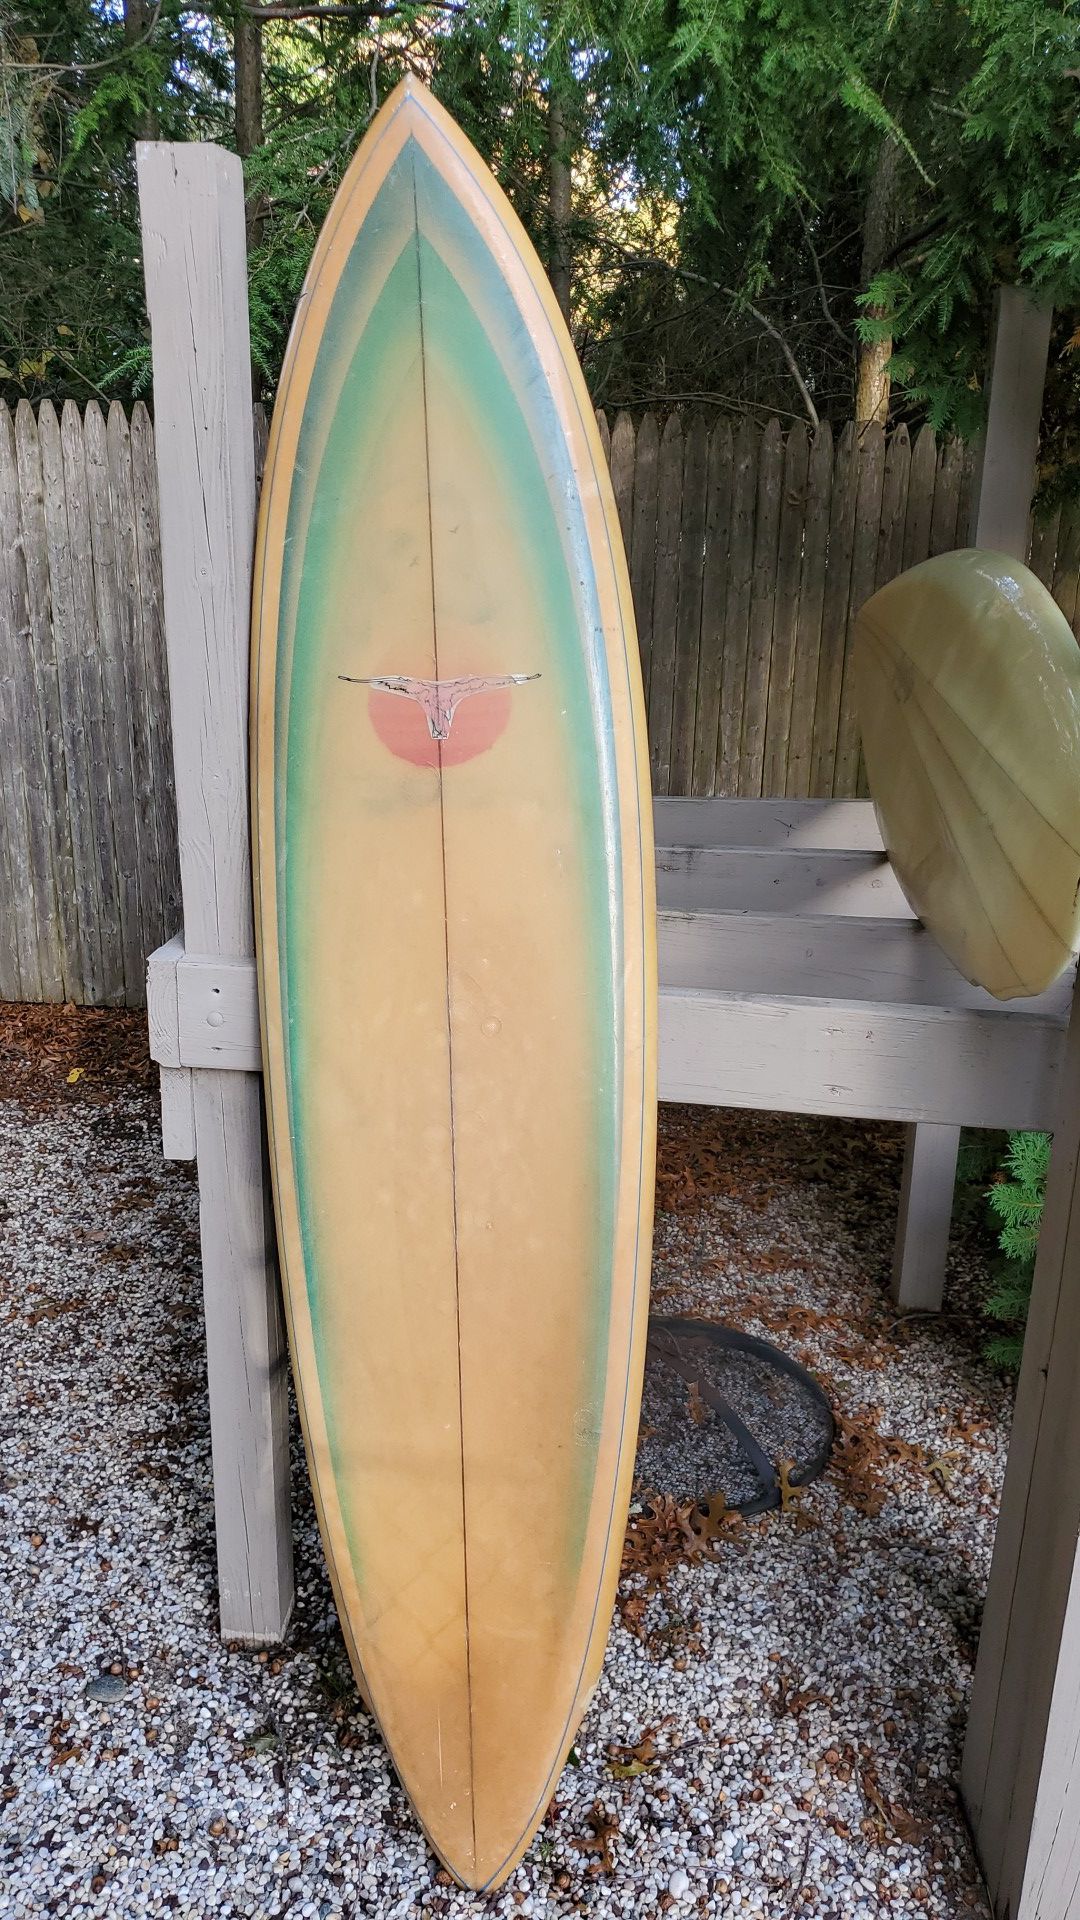 Seagull 7' surfboard from 1977